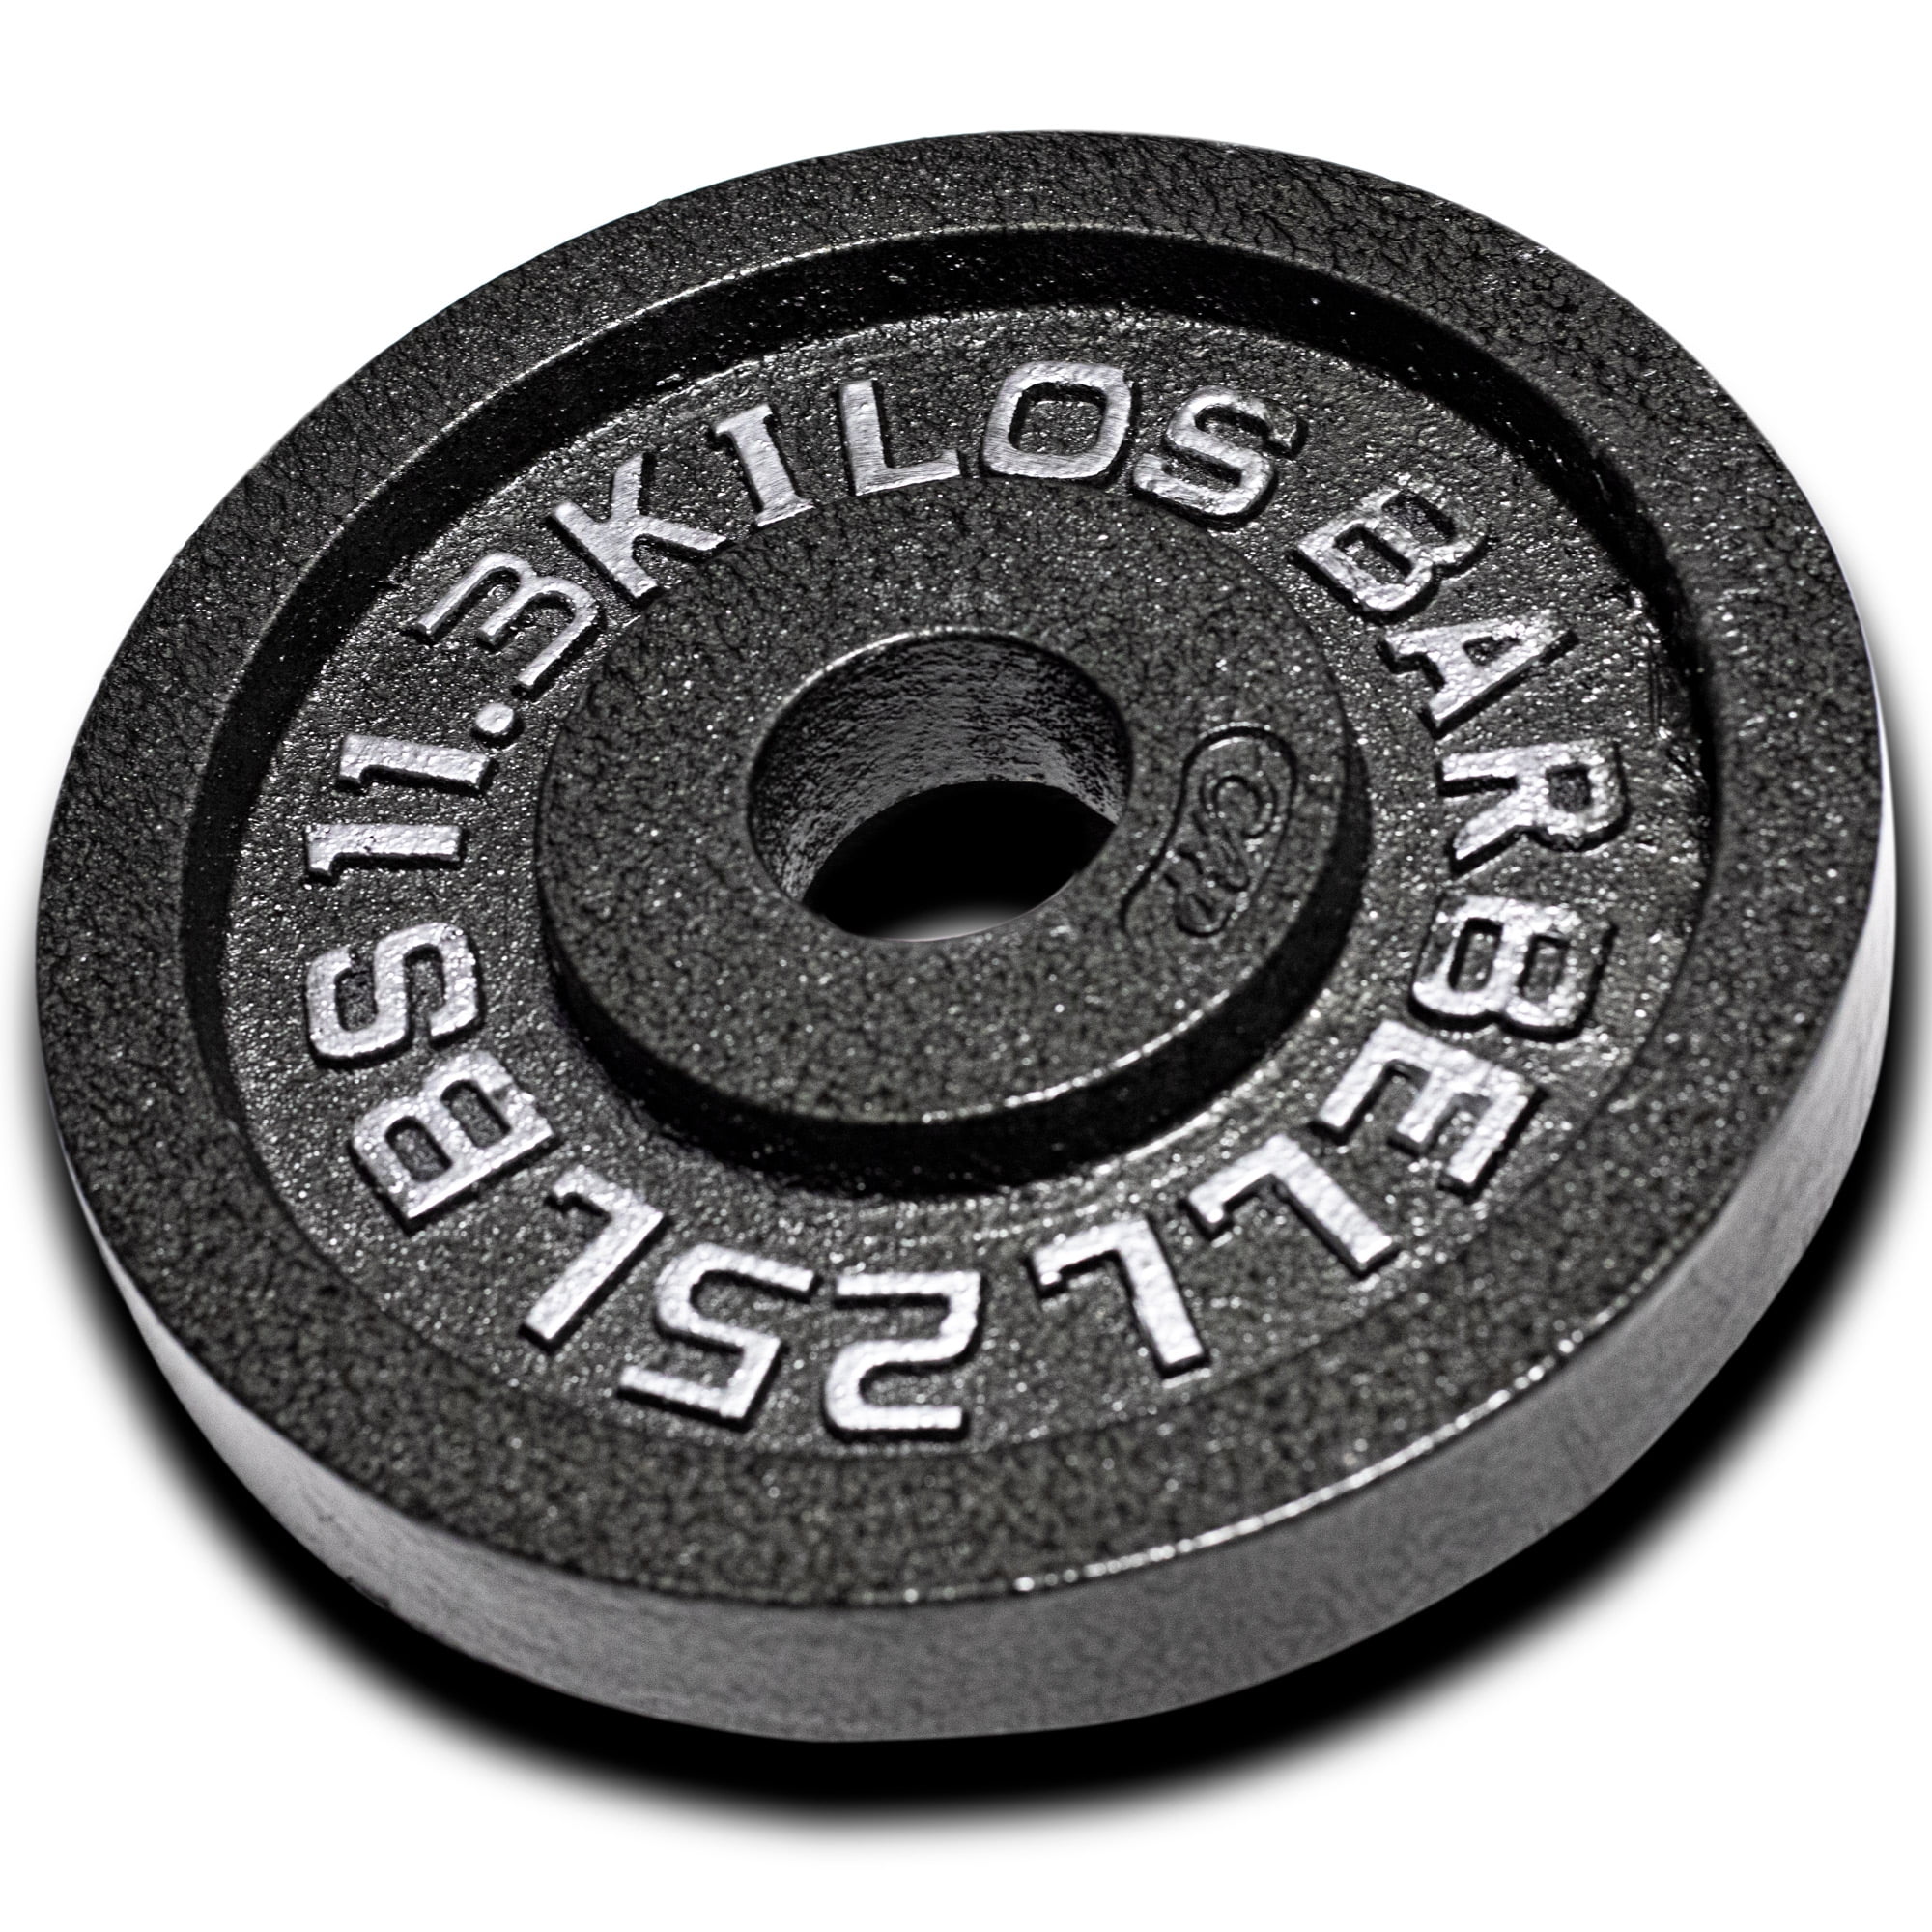 Cap 2.5 lbs Plates Set of 2-5LBs Total 1 Inch Hole Weight Training 